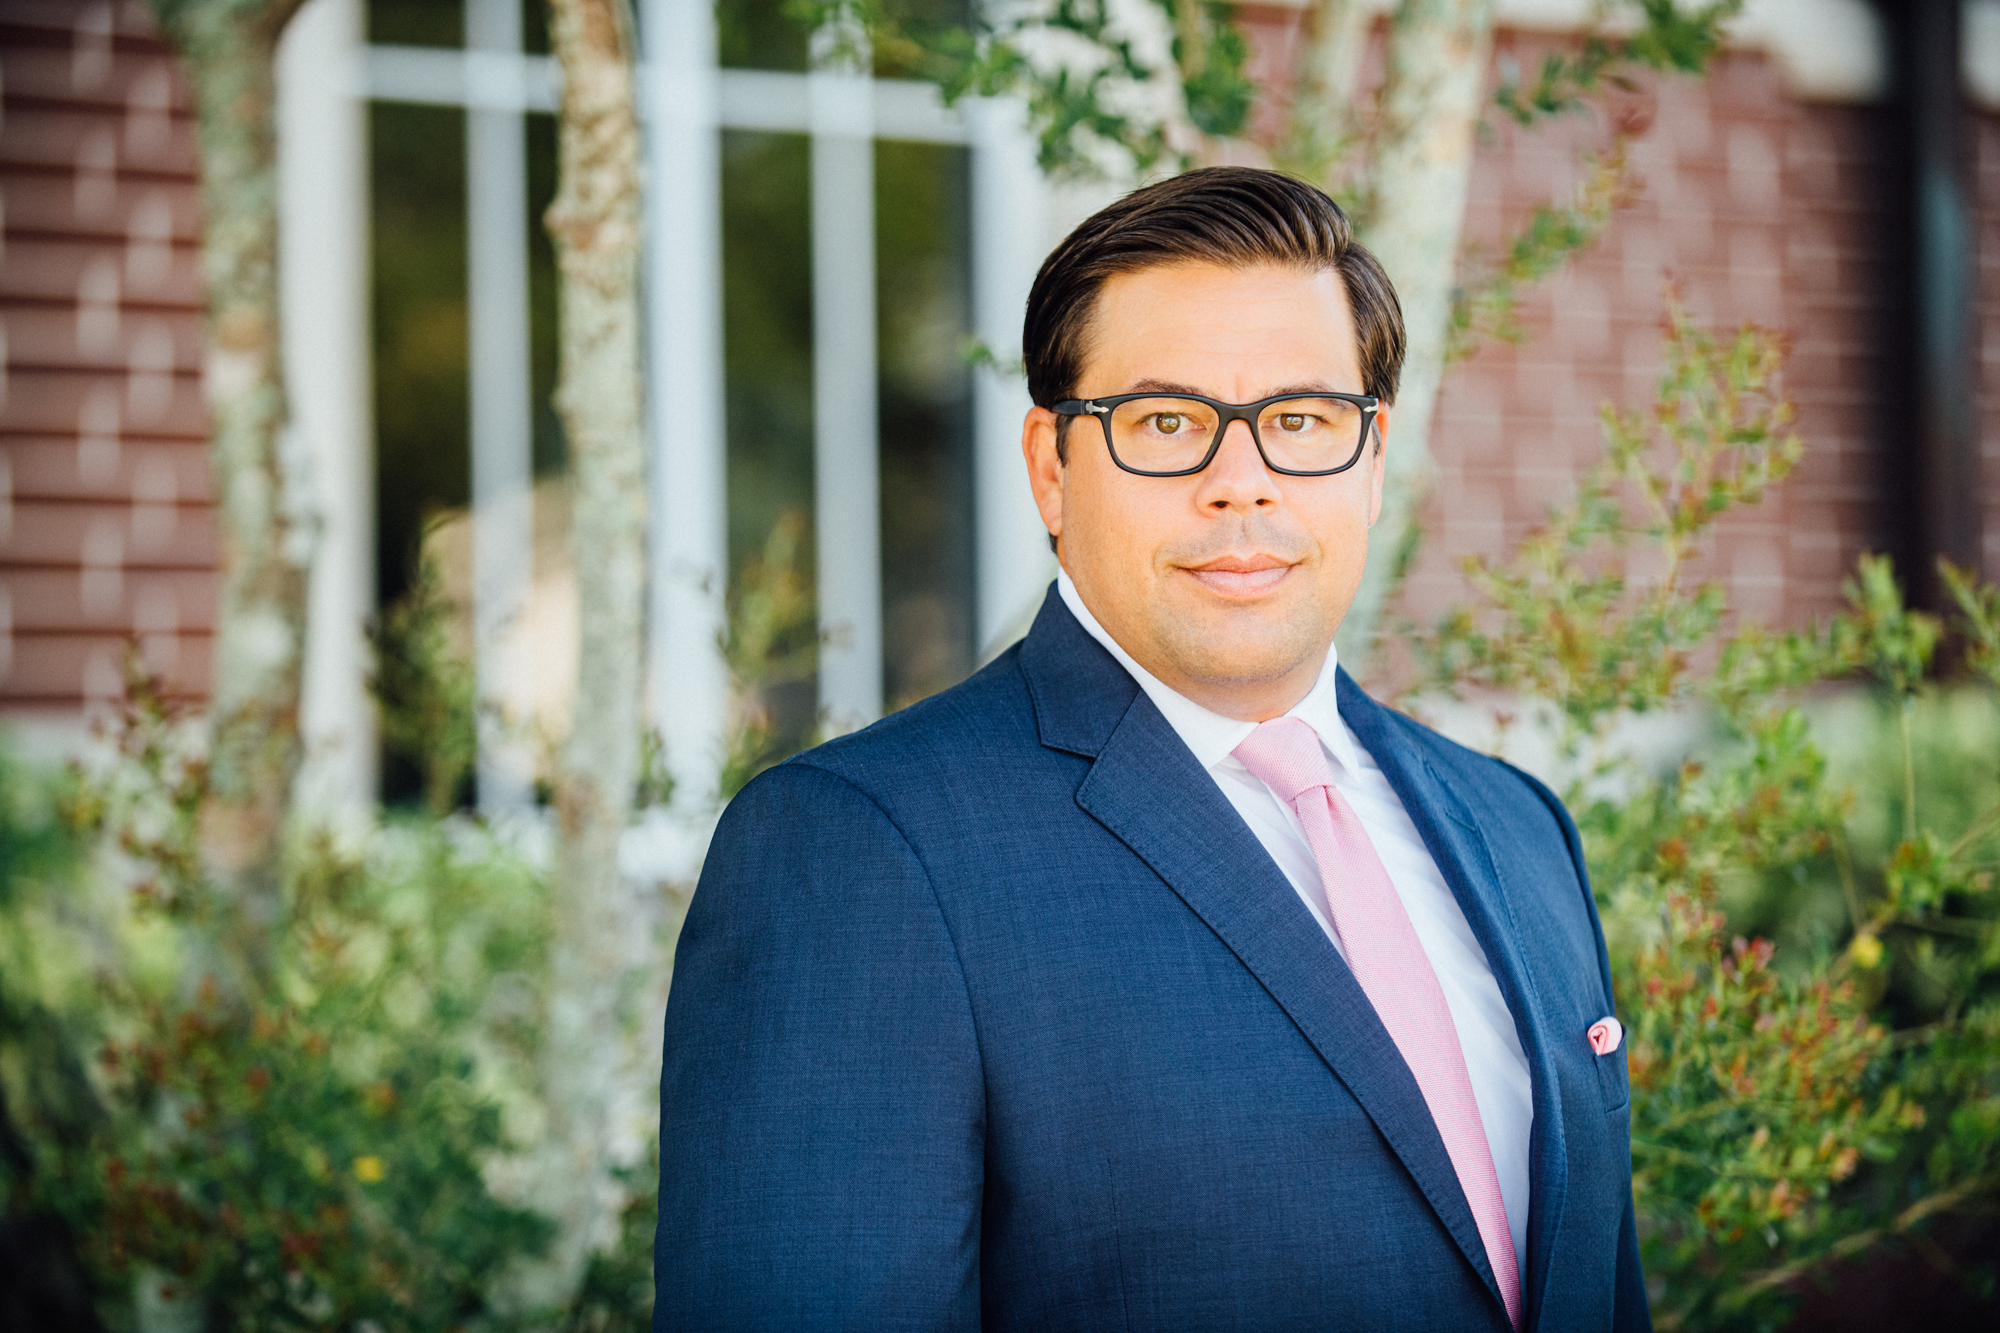 Courtesy. Ryan Rivas has been named co-managing partner of Hall Booth Smith's new Tampa office.